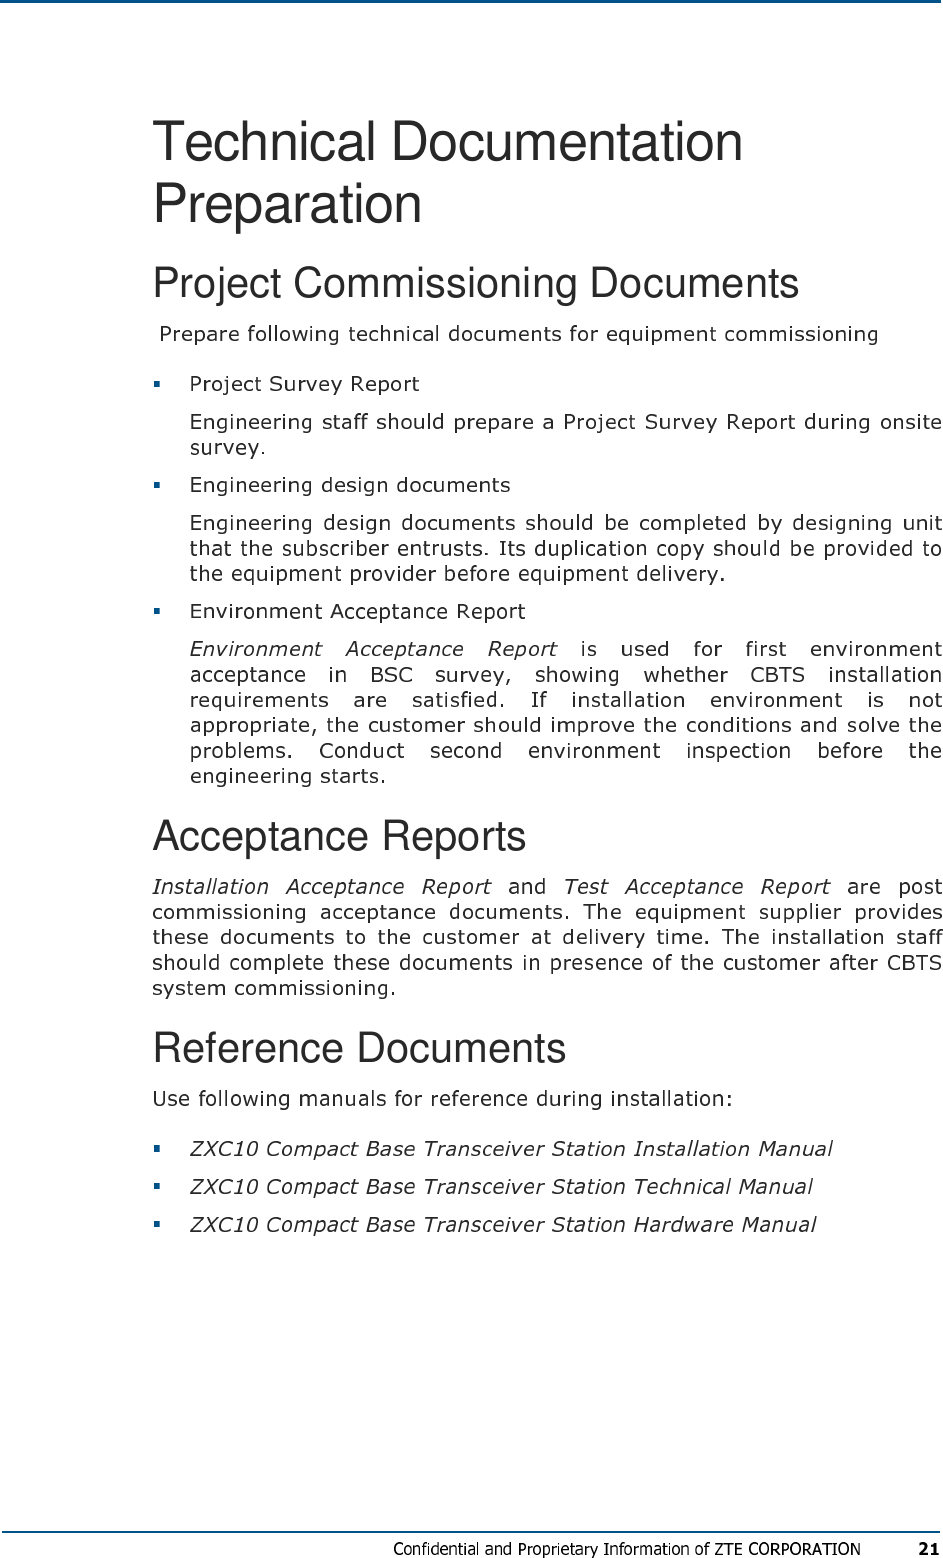 Technical Documentation Preparation  Project Commissioning Documents    Acceptance Reports Reference Documents    